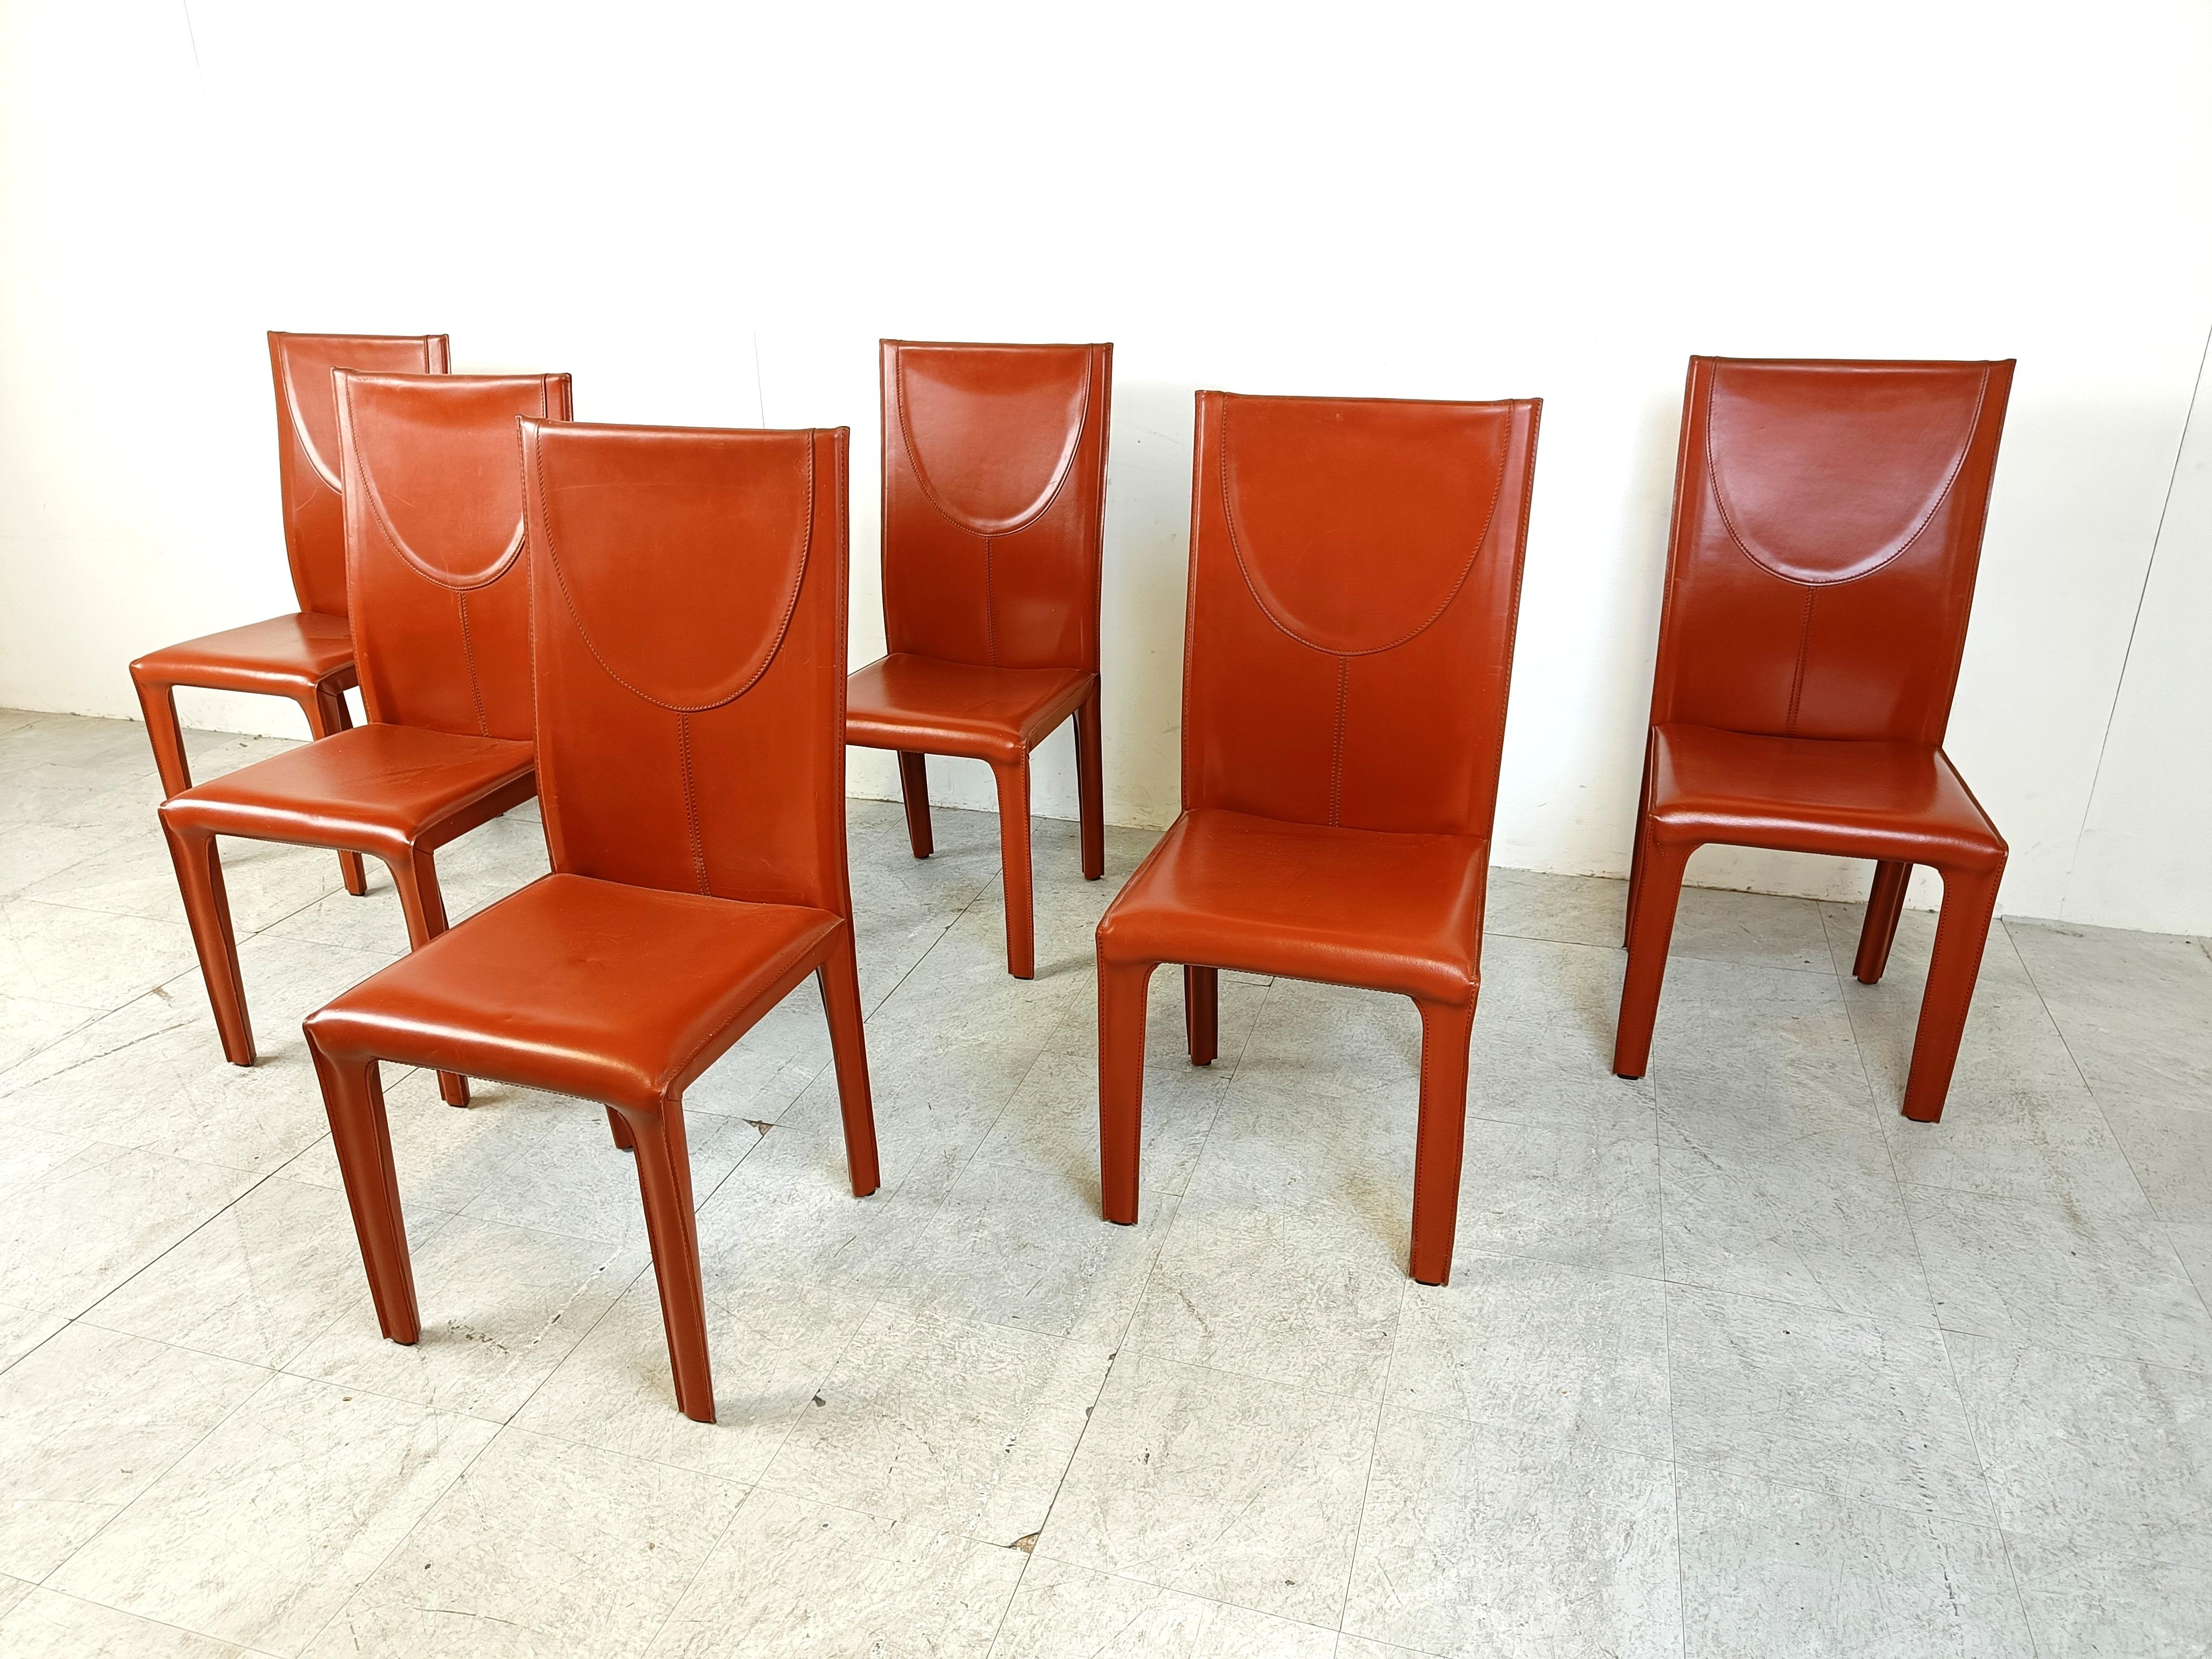 Late 20th Century Red leather dining chairs by Arper italy, 1980s - set of 6 For Sale